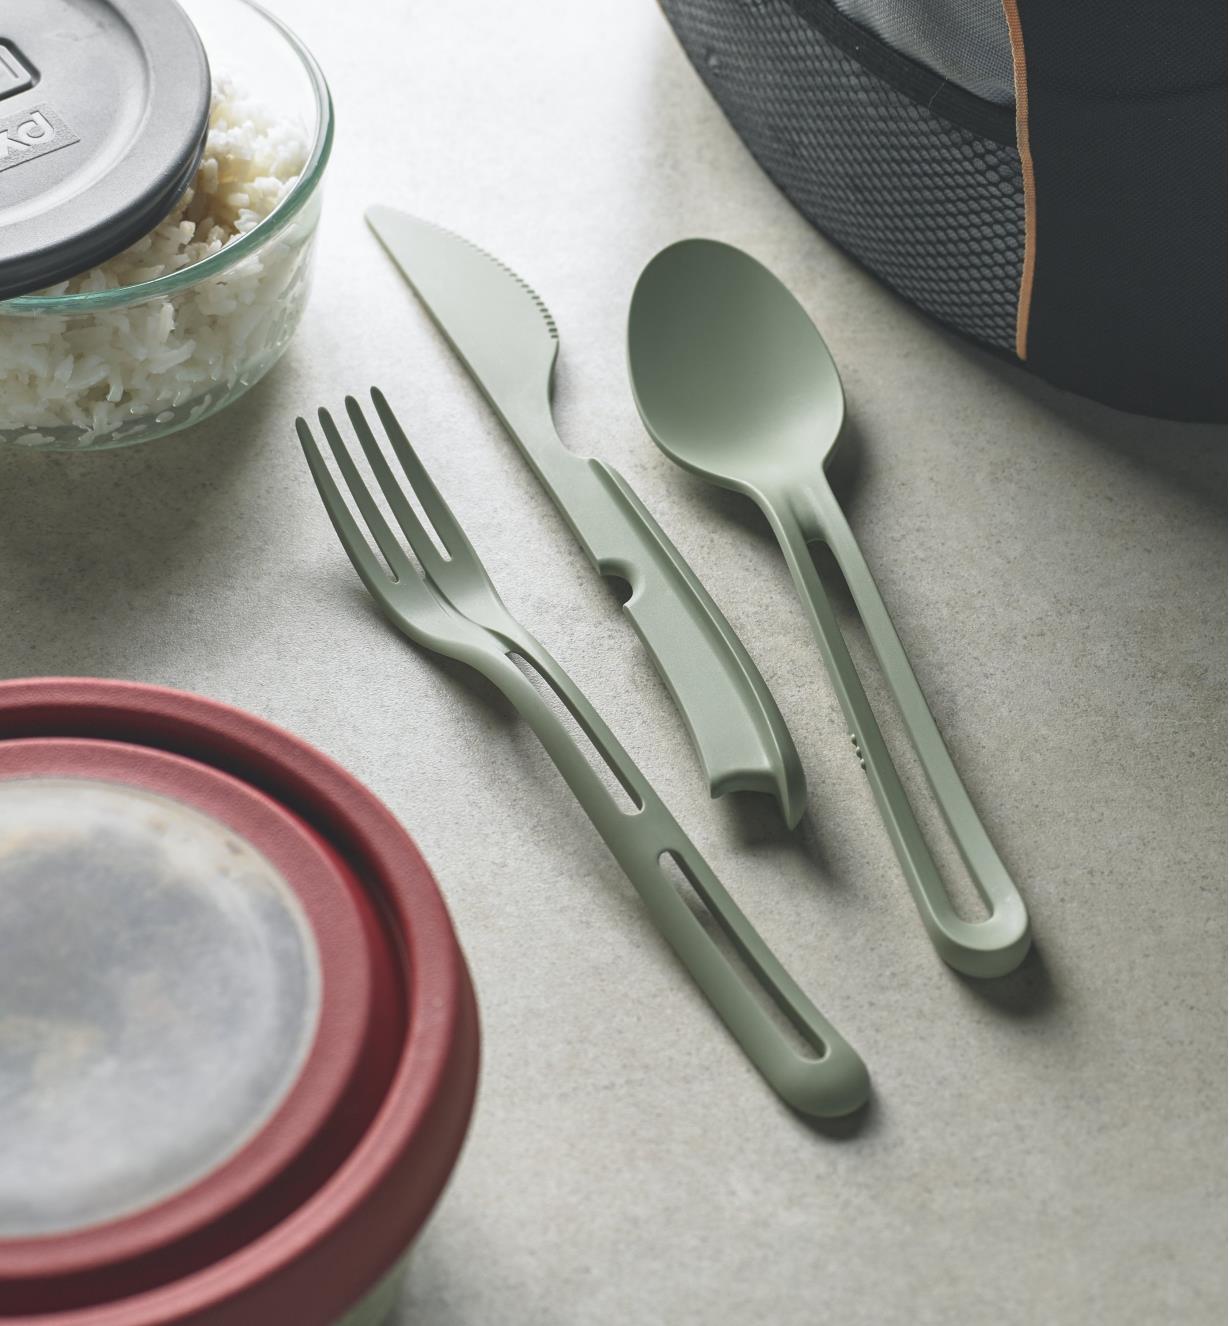 Klikk utensils set out on a table, ready to use